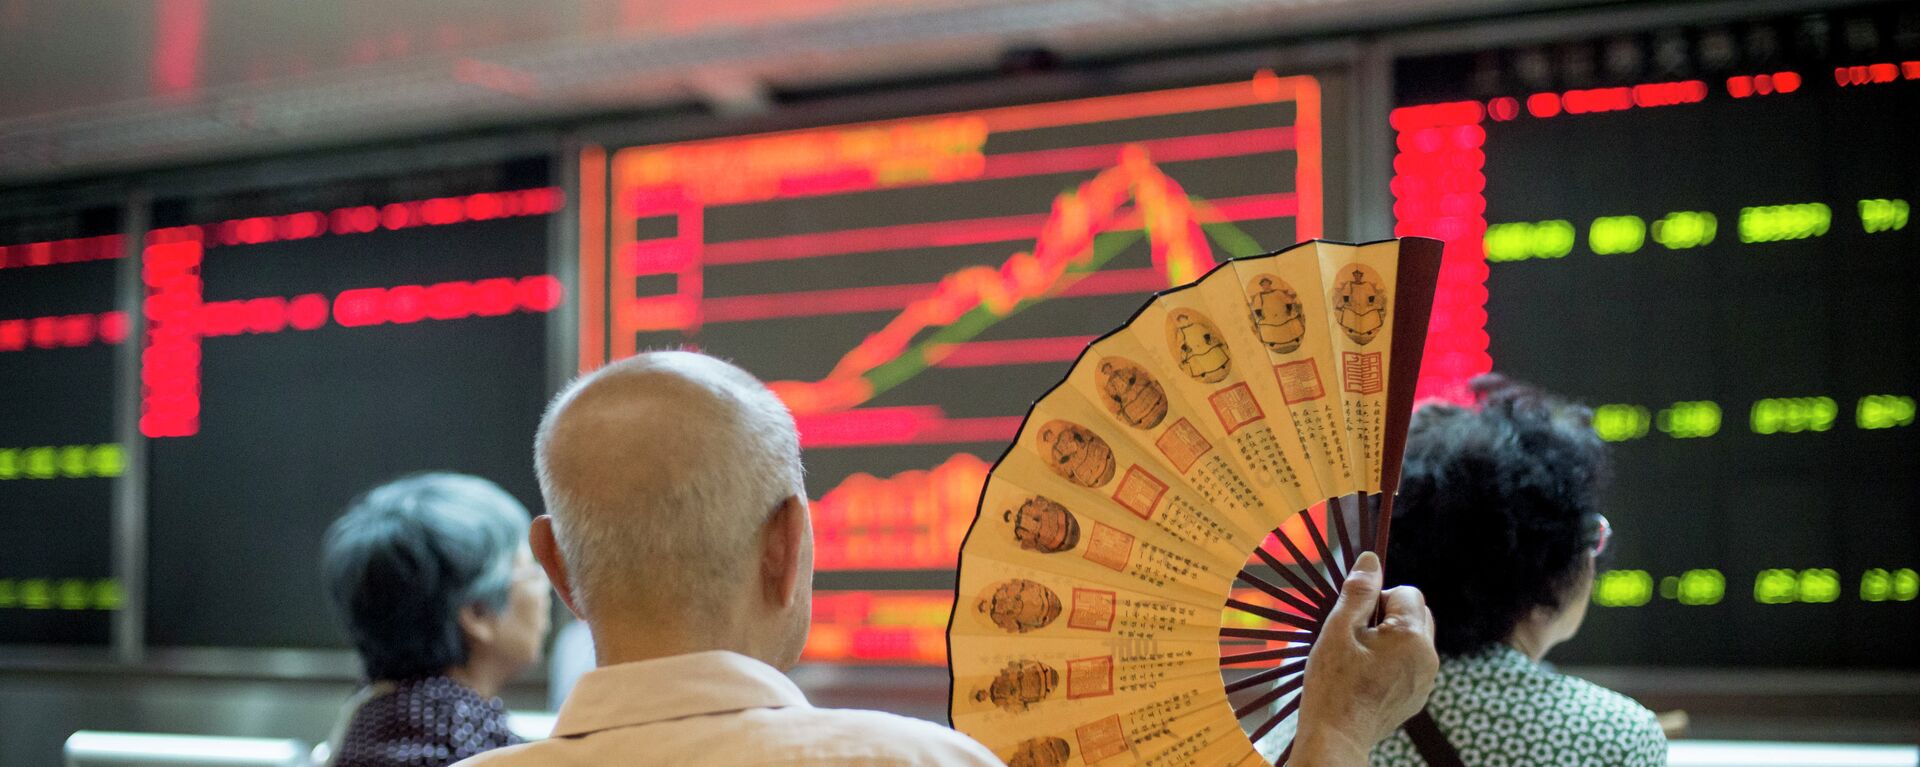 Investors look at screens showing stock market movements at a securities company in Beijing on July 28, 2015 - Sputnik International, 1920, 20.09.2021